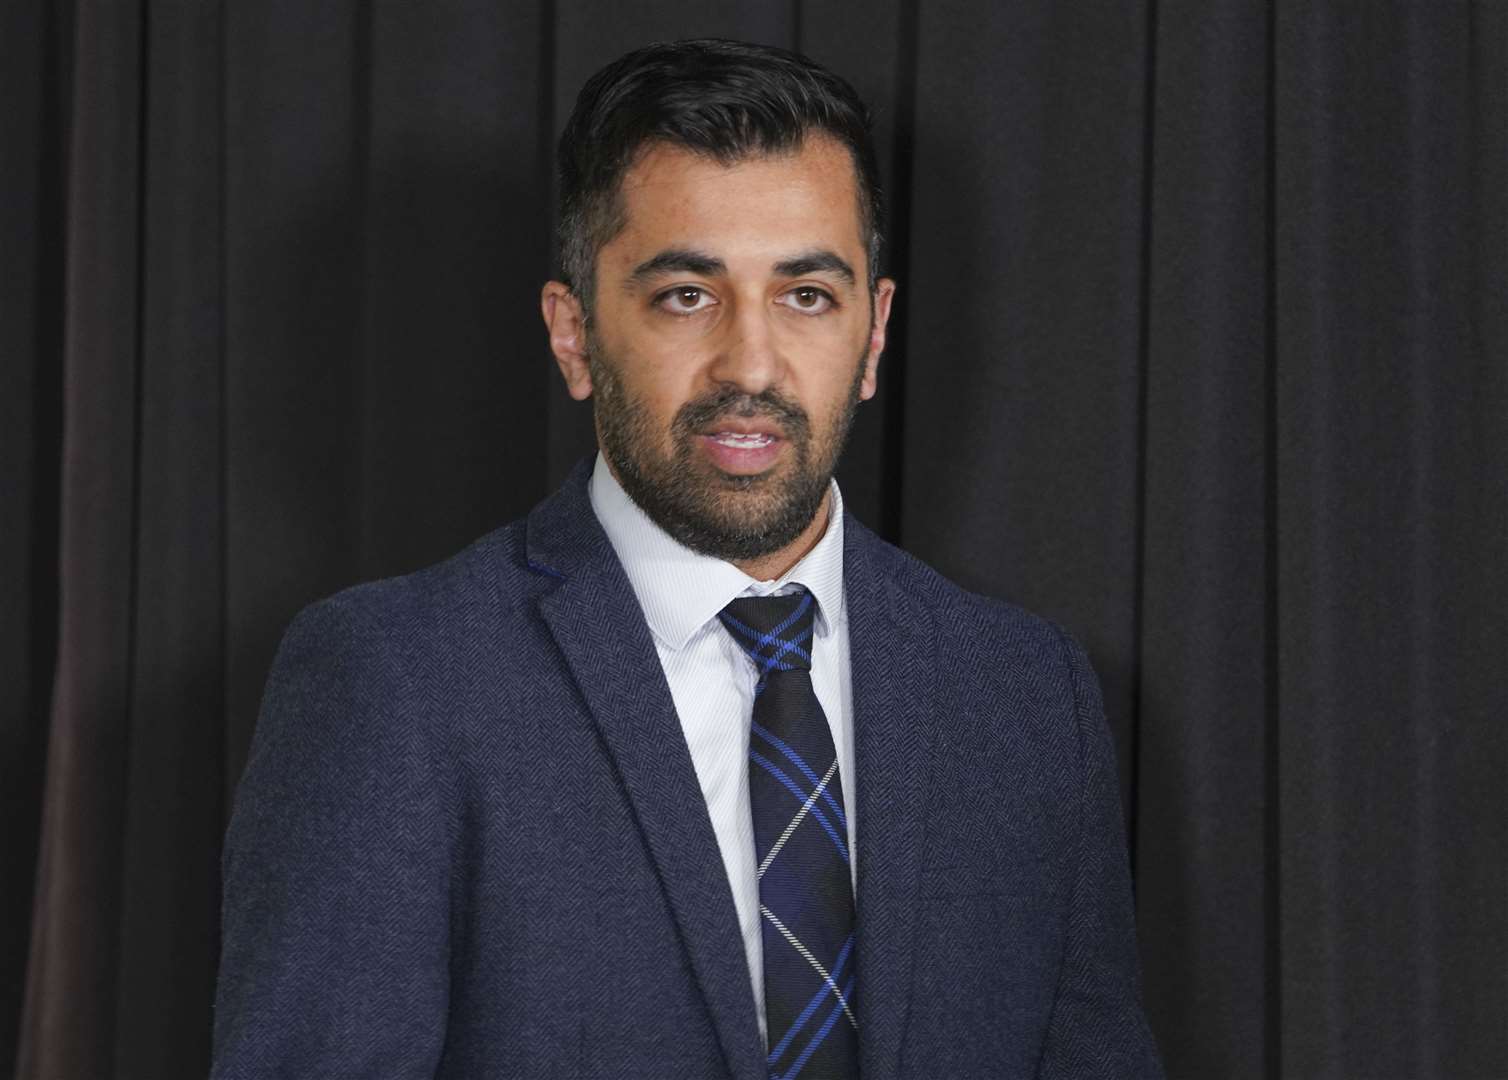 Health secretary Humza Yousaf's letter to Caithness Health Action Team contained a number of positives, according to the group's chairman.